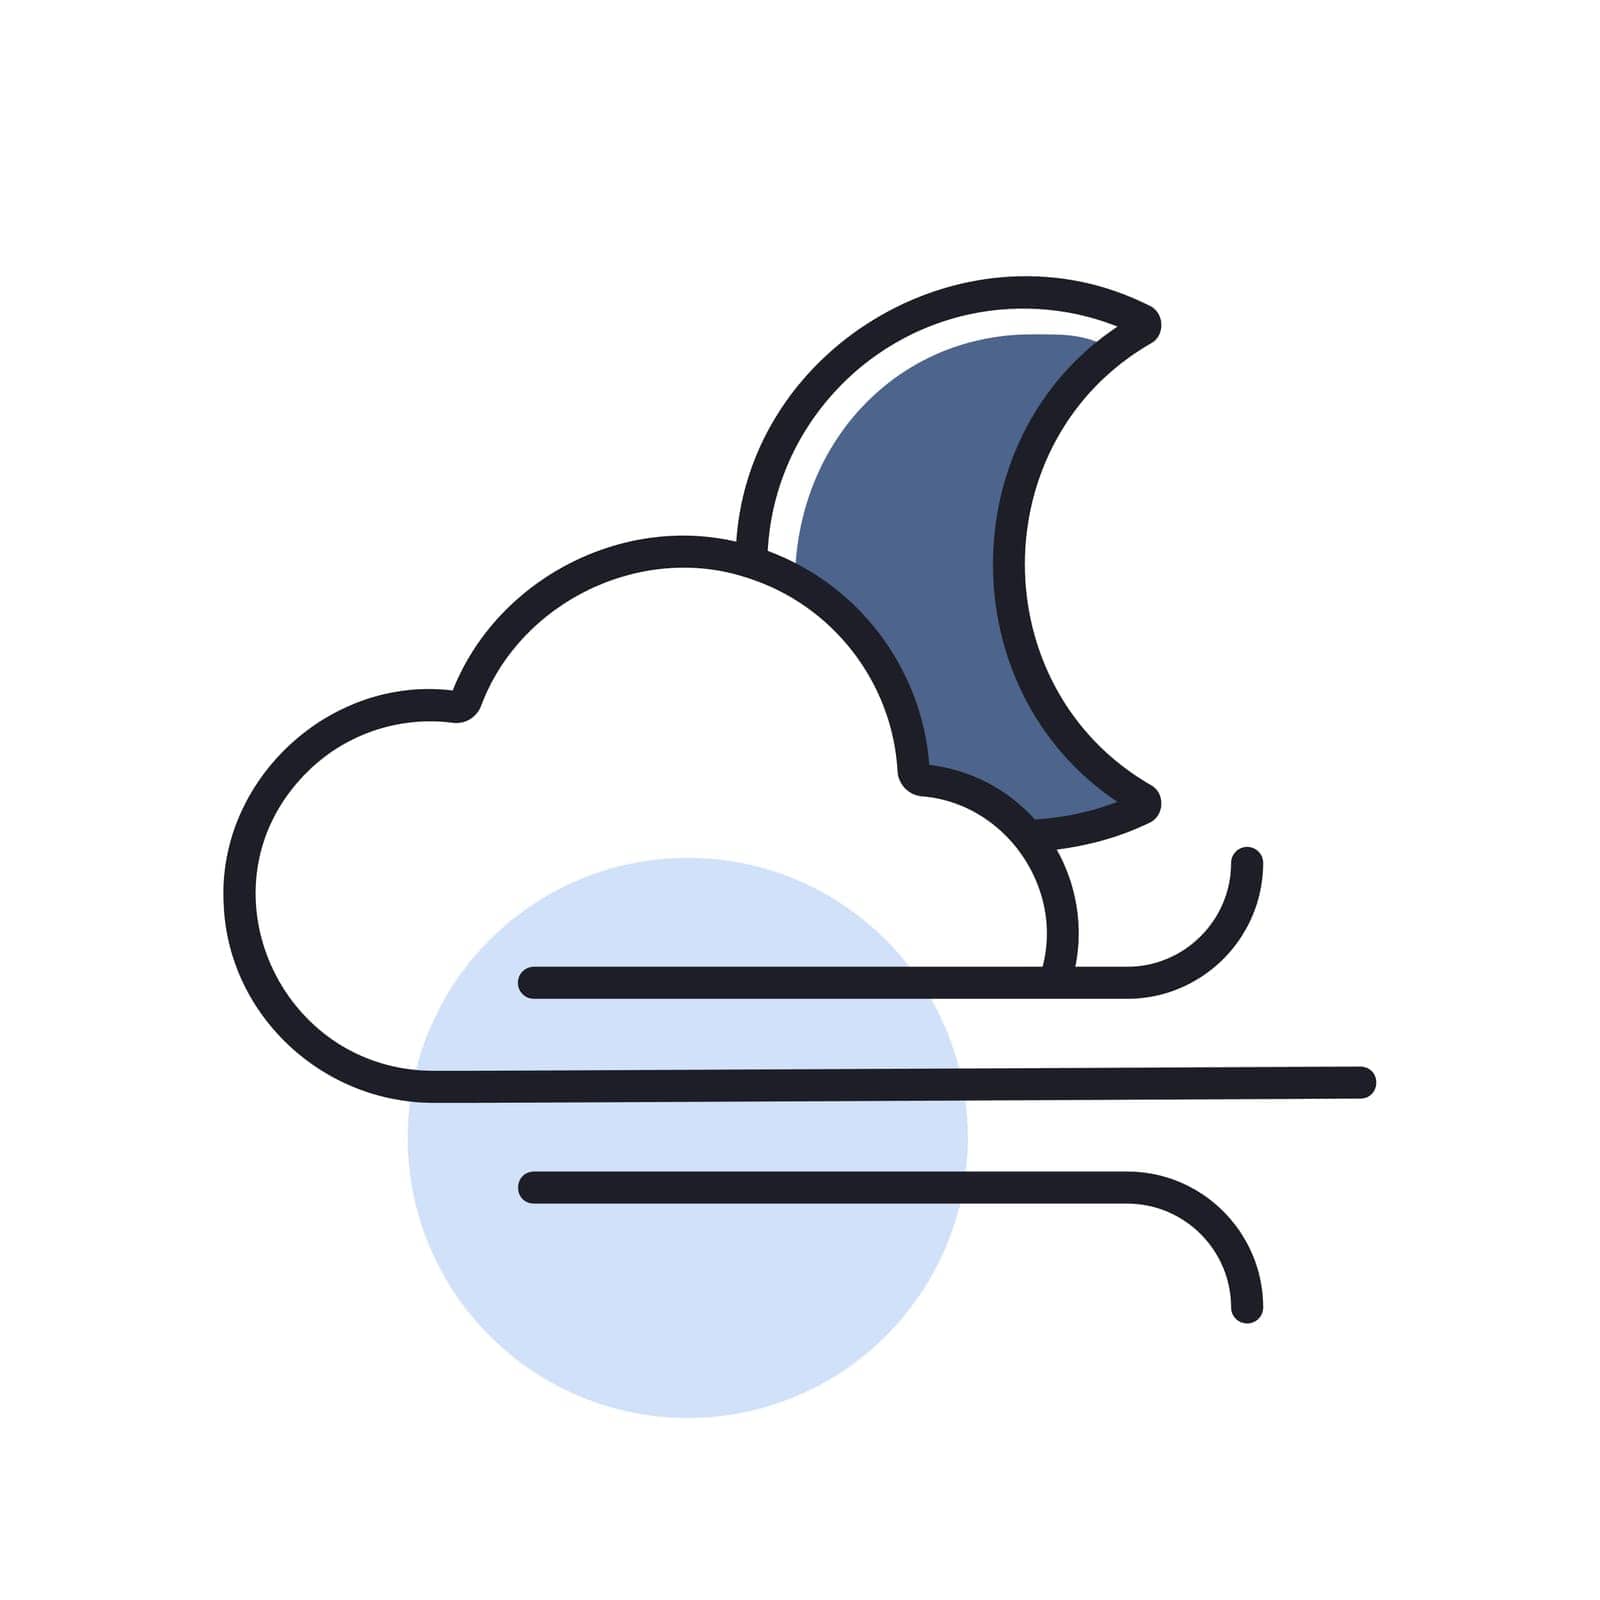 Moon cloudy and wind vector icon. Weather sign by nosik